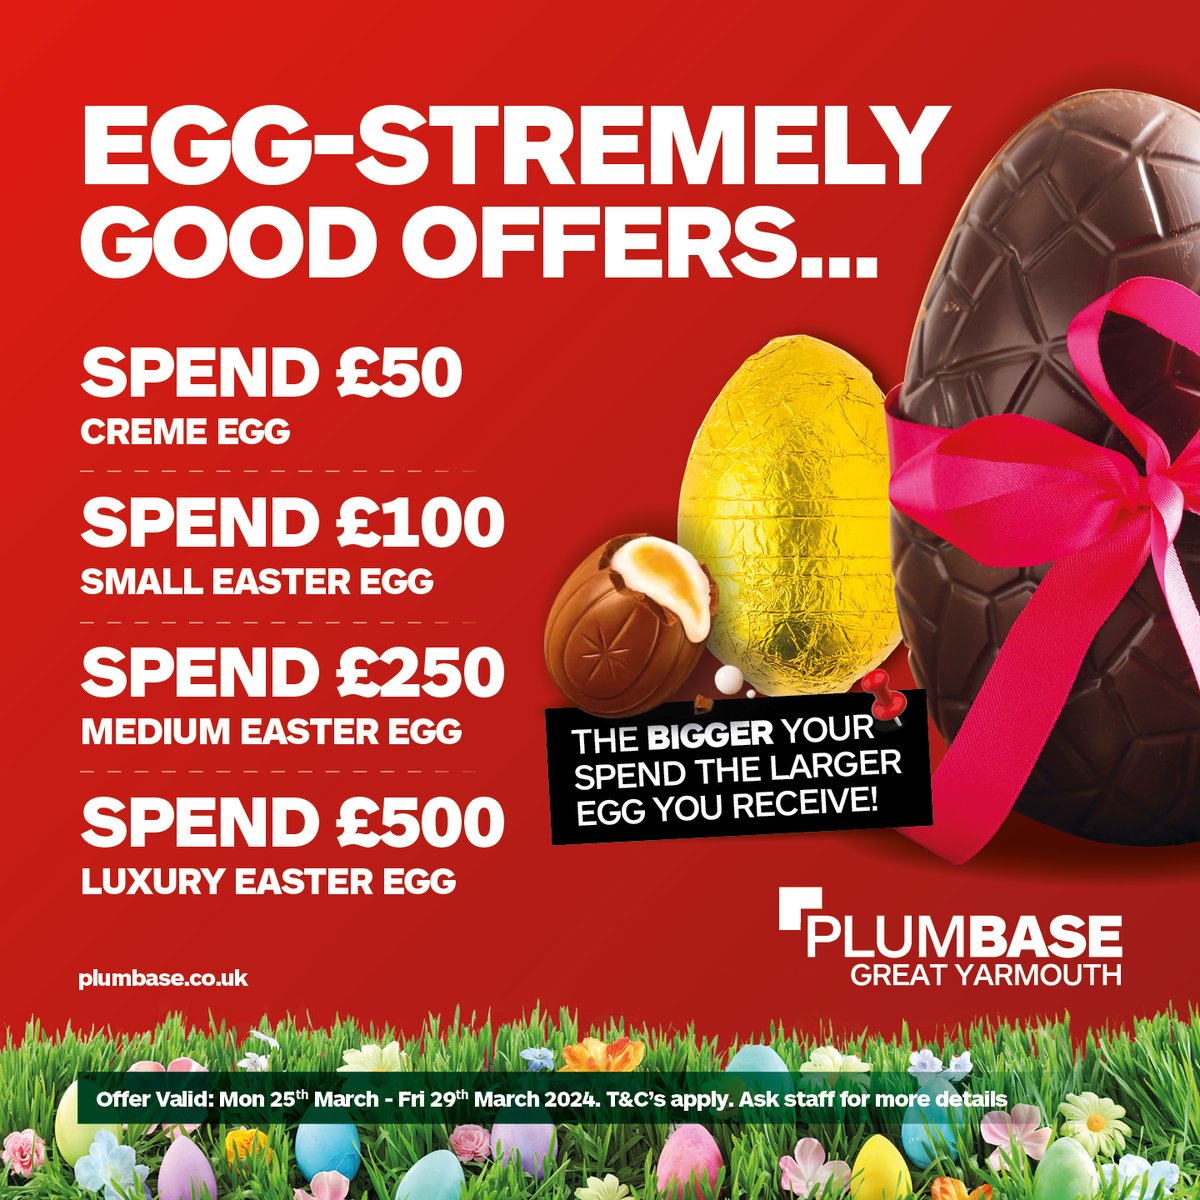 🥚🐣Egg citing times are coming to Plumbase Great Yarmouth next week with their EGG stremely good offers. 🐰🐰 T&C's apply. #easter #plumbers #plumbersmerchants # bathroomfitters